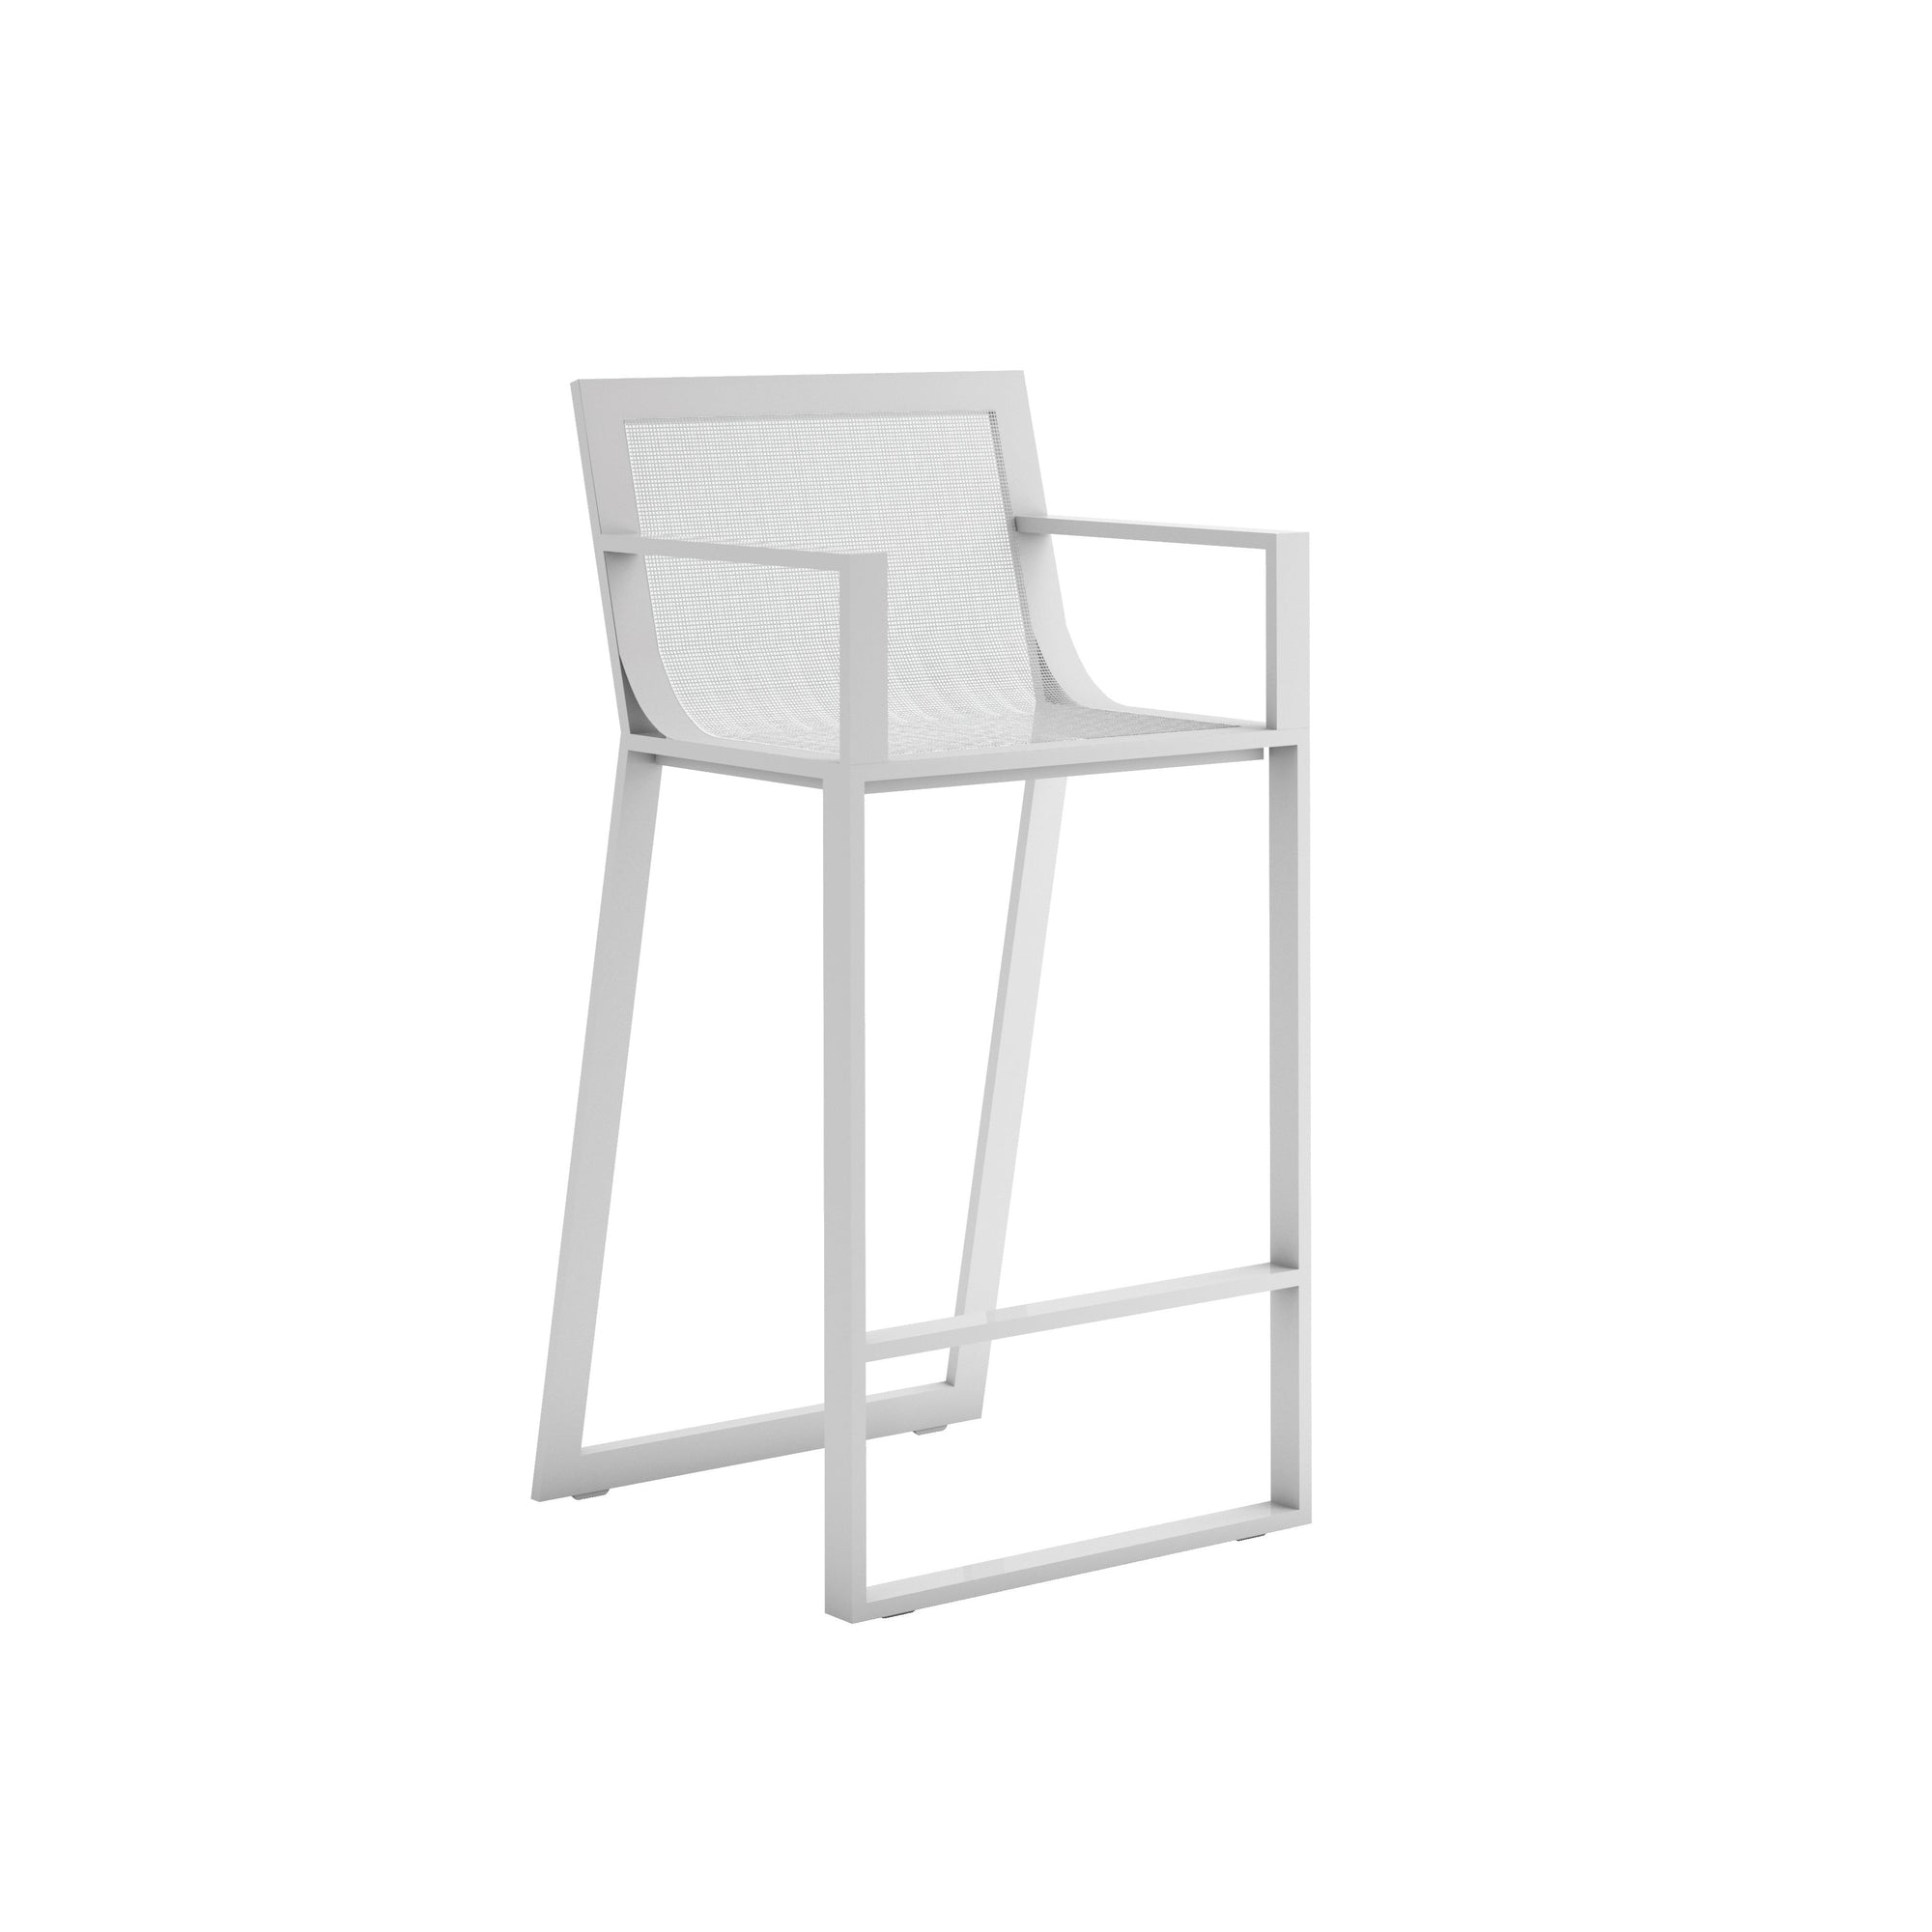 Gandia Blasco Blue High Stool with backrest and arms